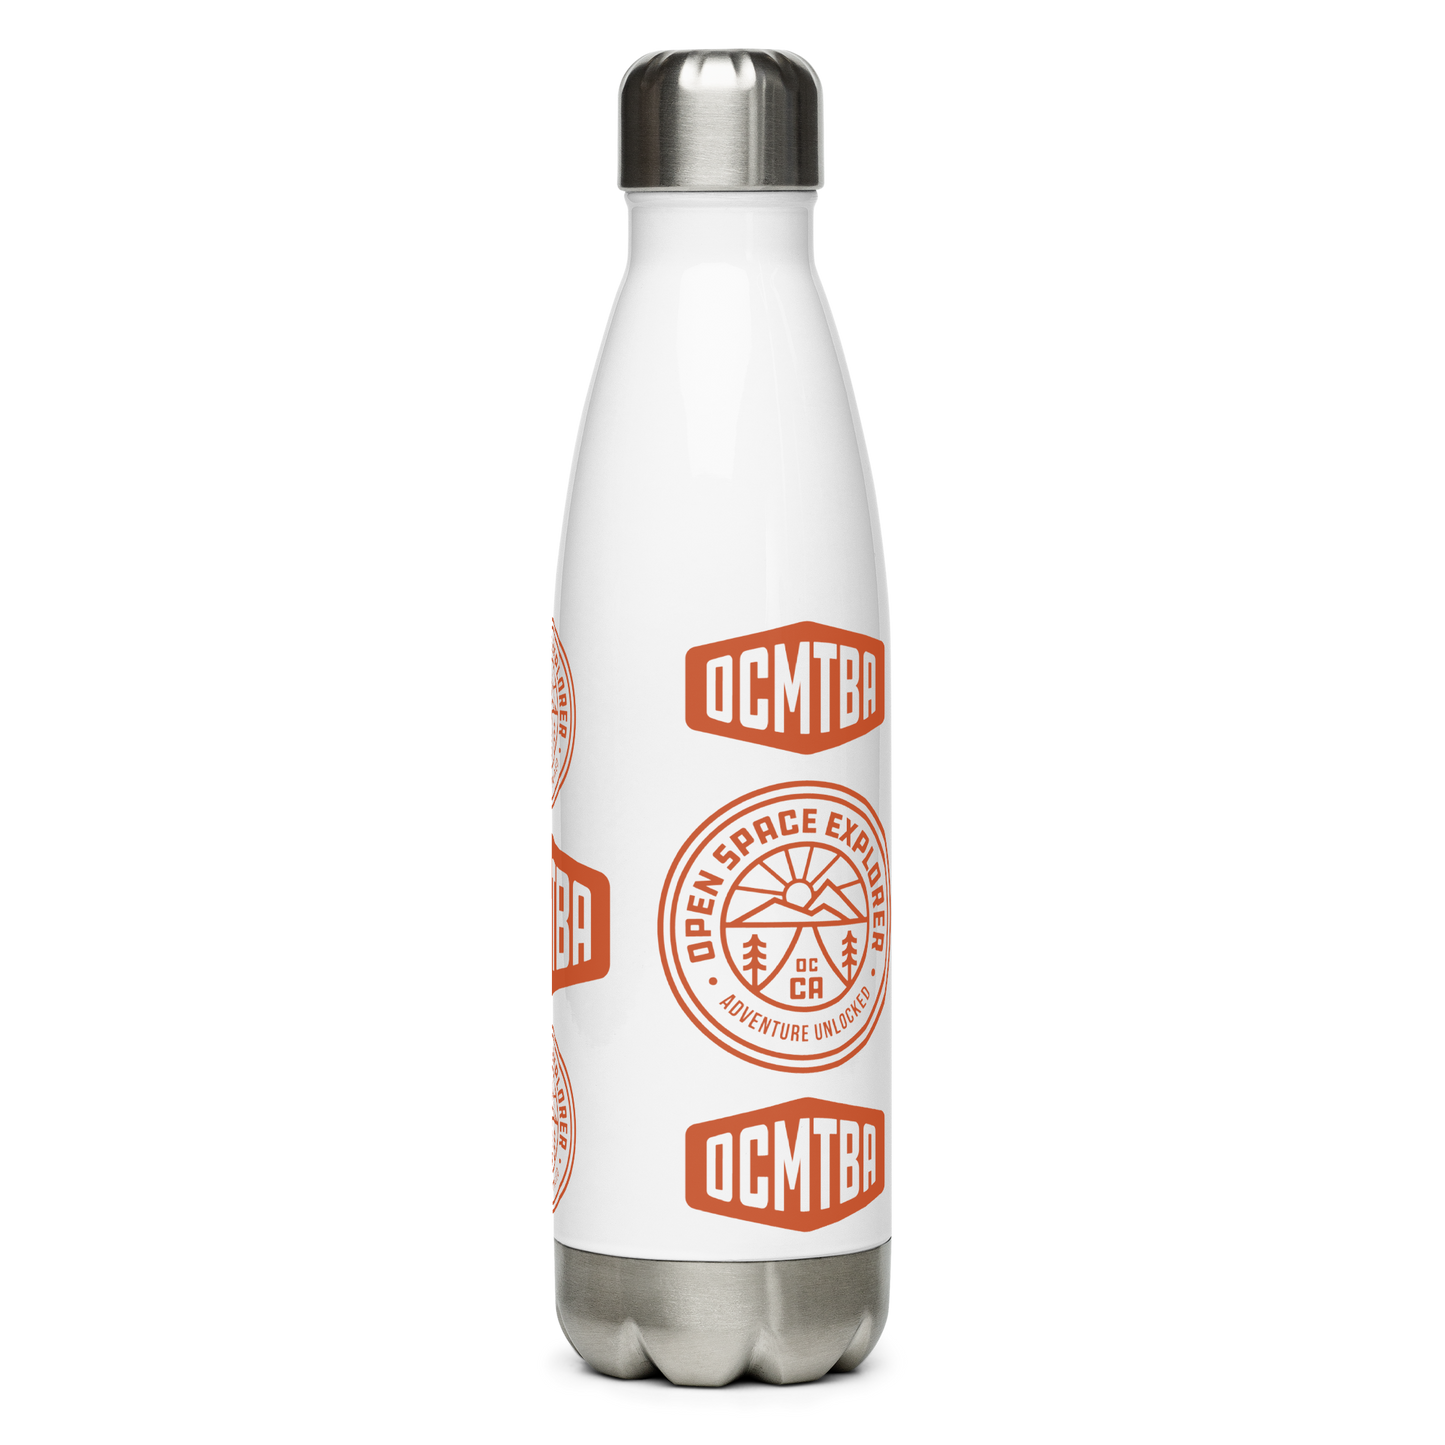 OCMTBA stainless steel bottle with Open Space Explore badge in a 1 color print